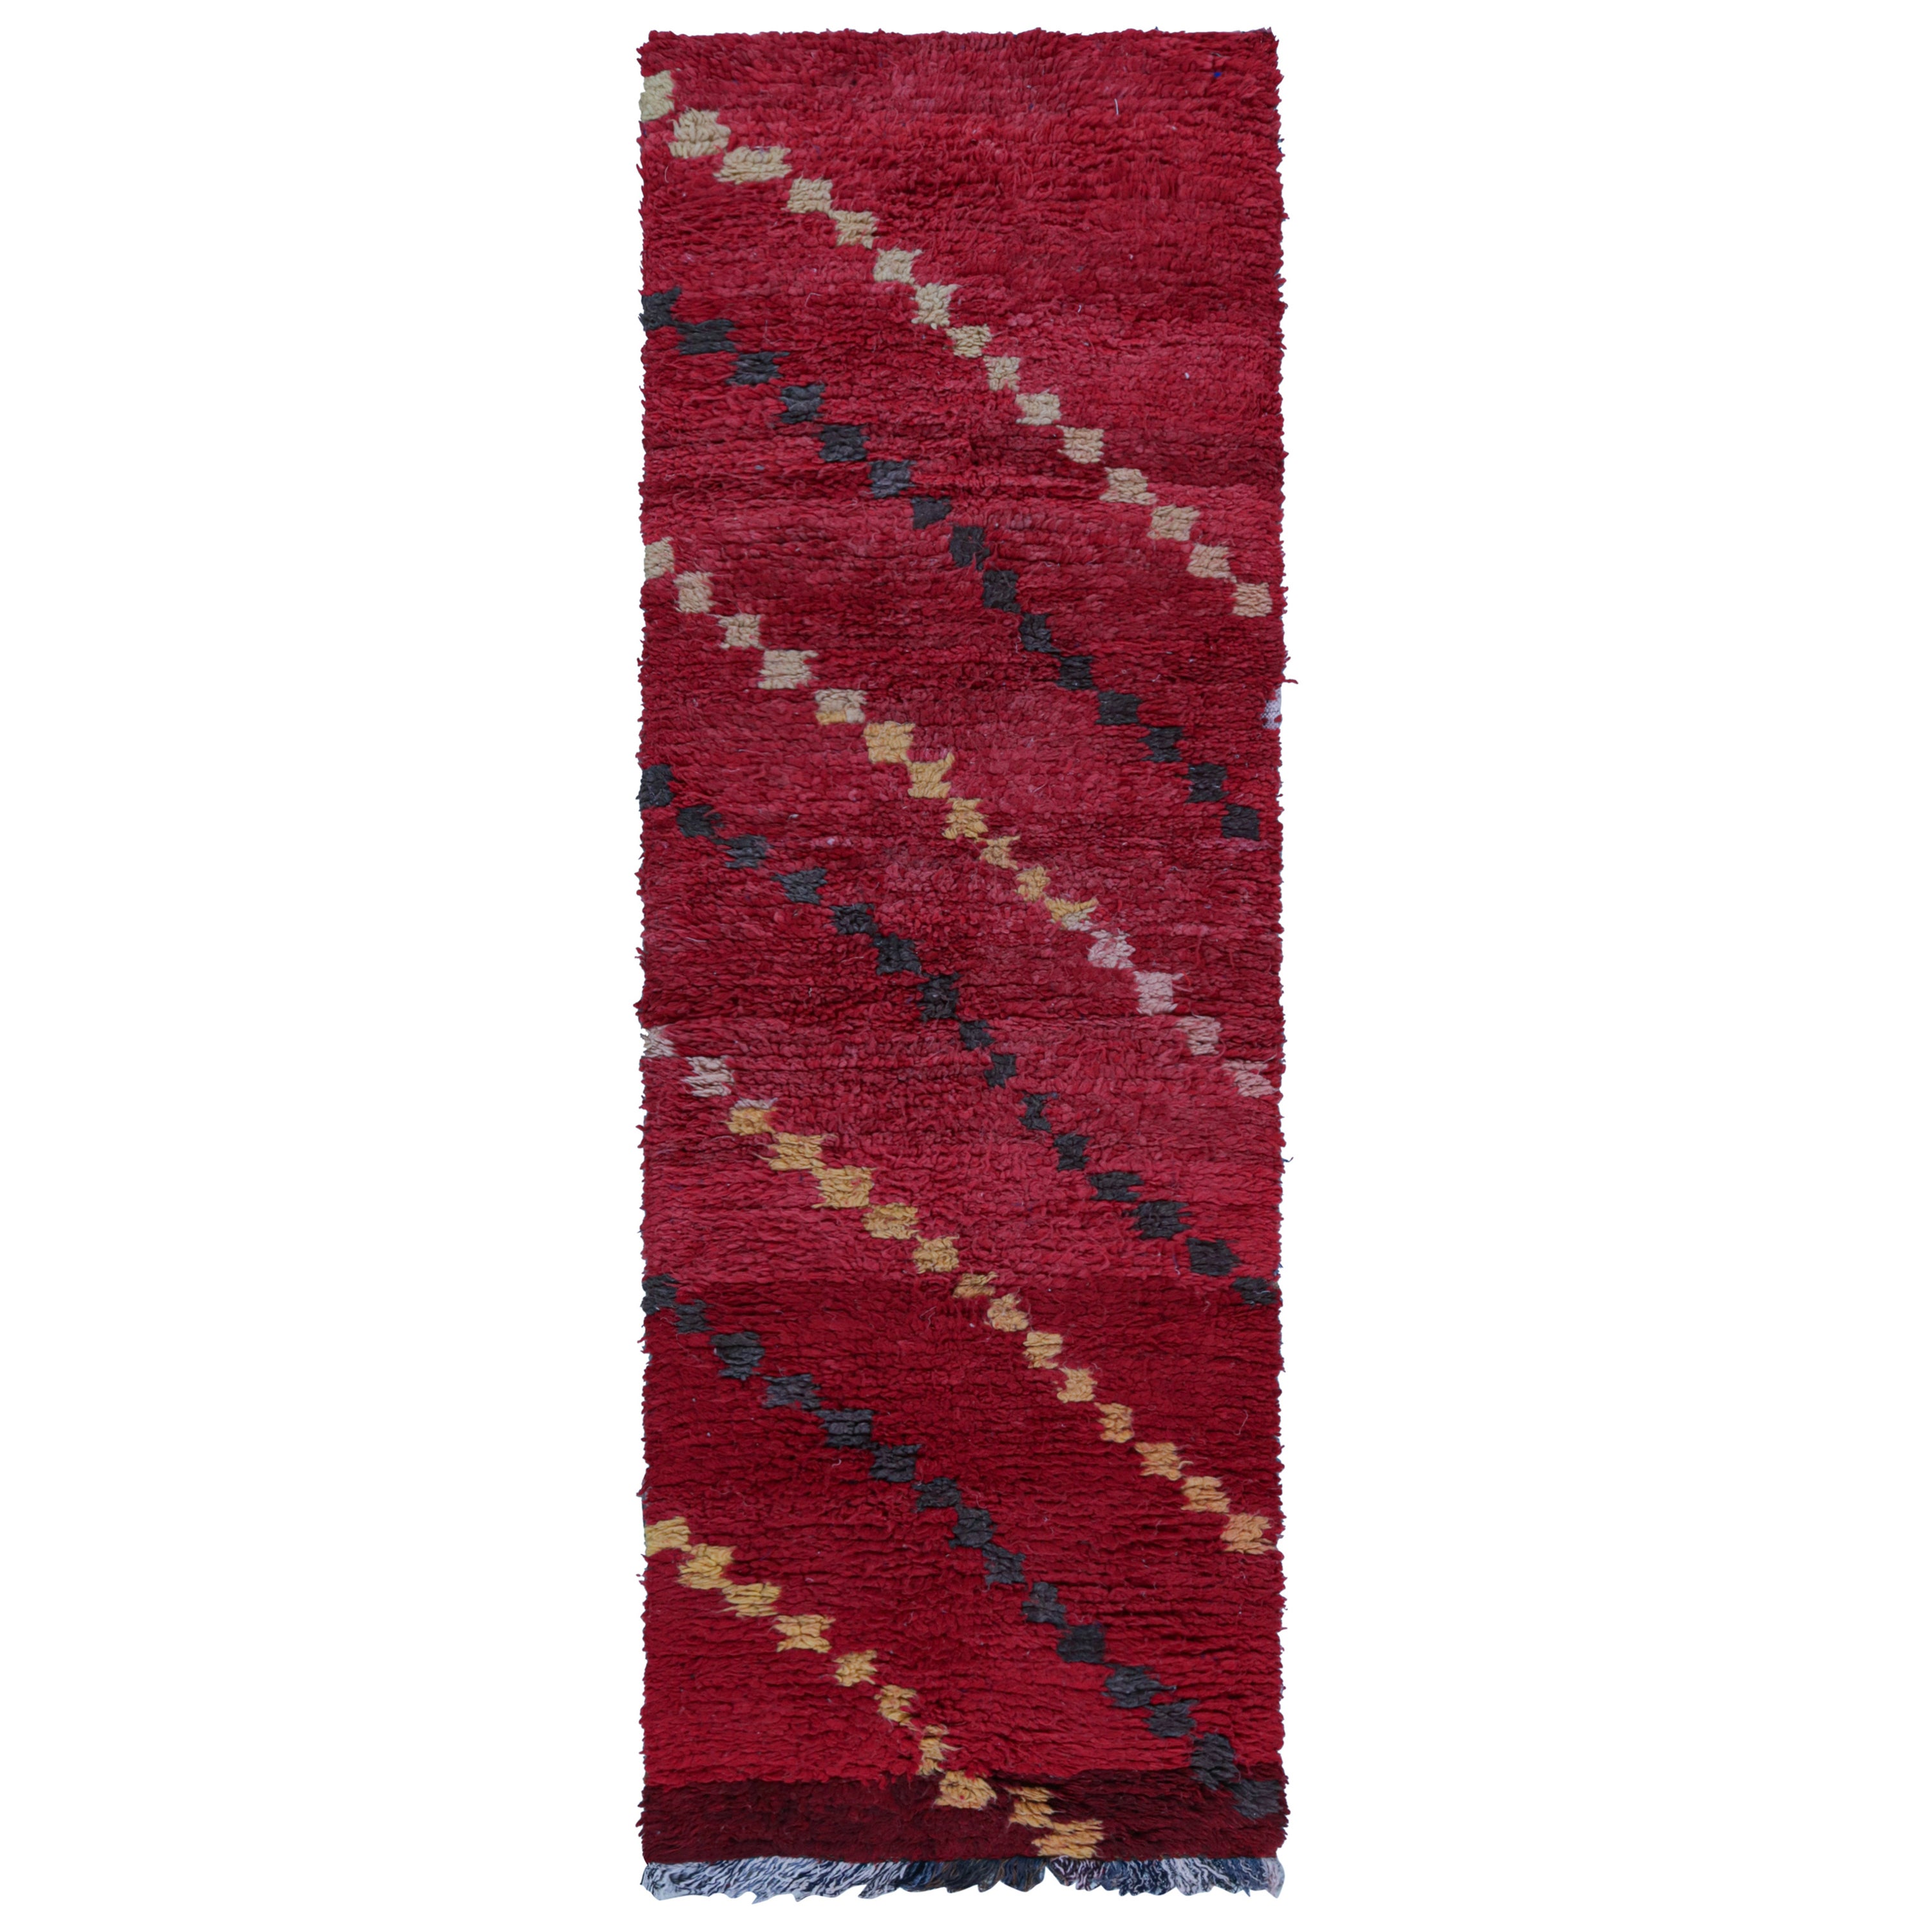 1950s Azilal Moroccan runner rug in Red with Geometric Patterns by Rug & Kilim